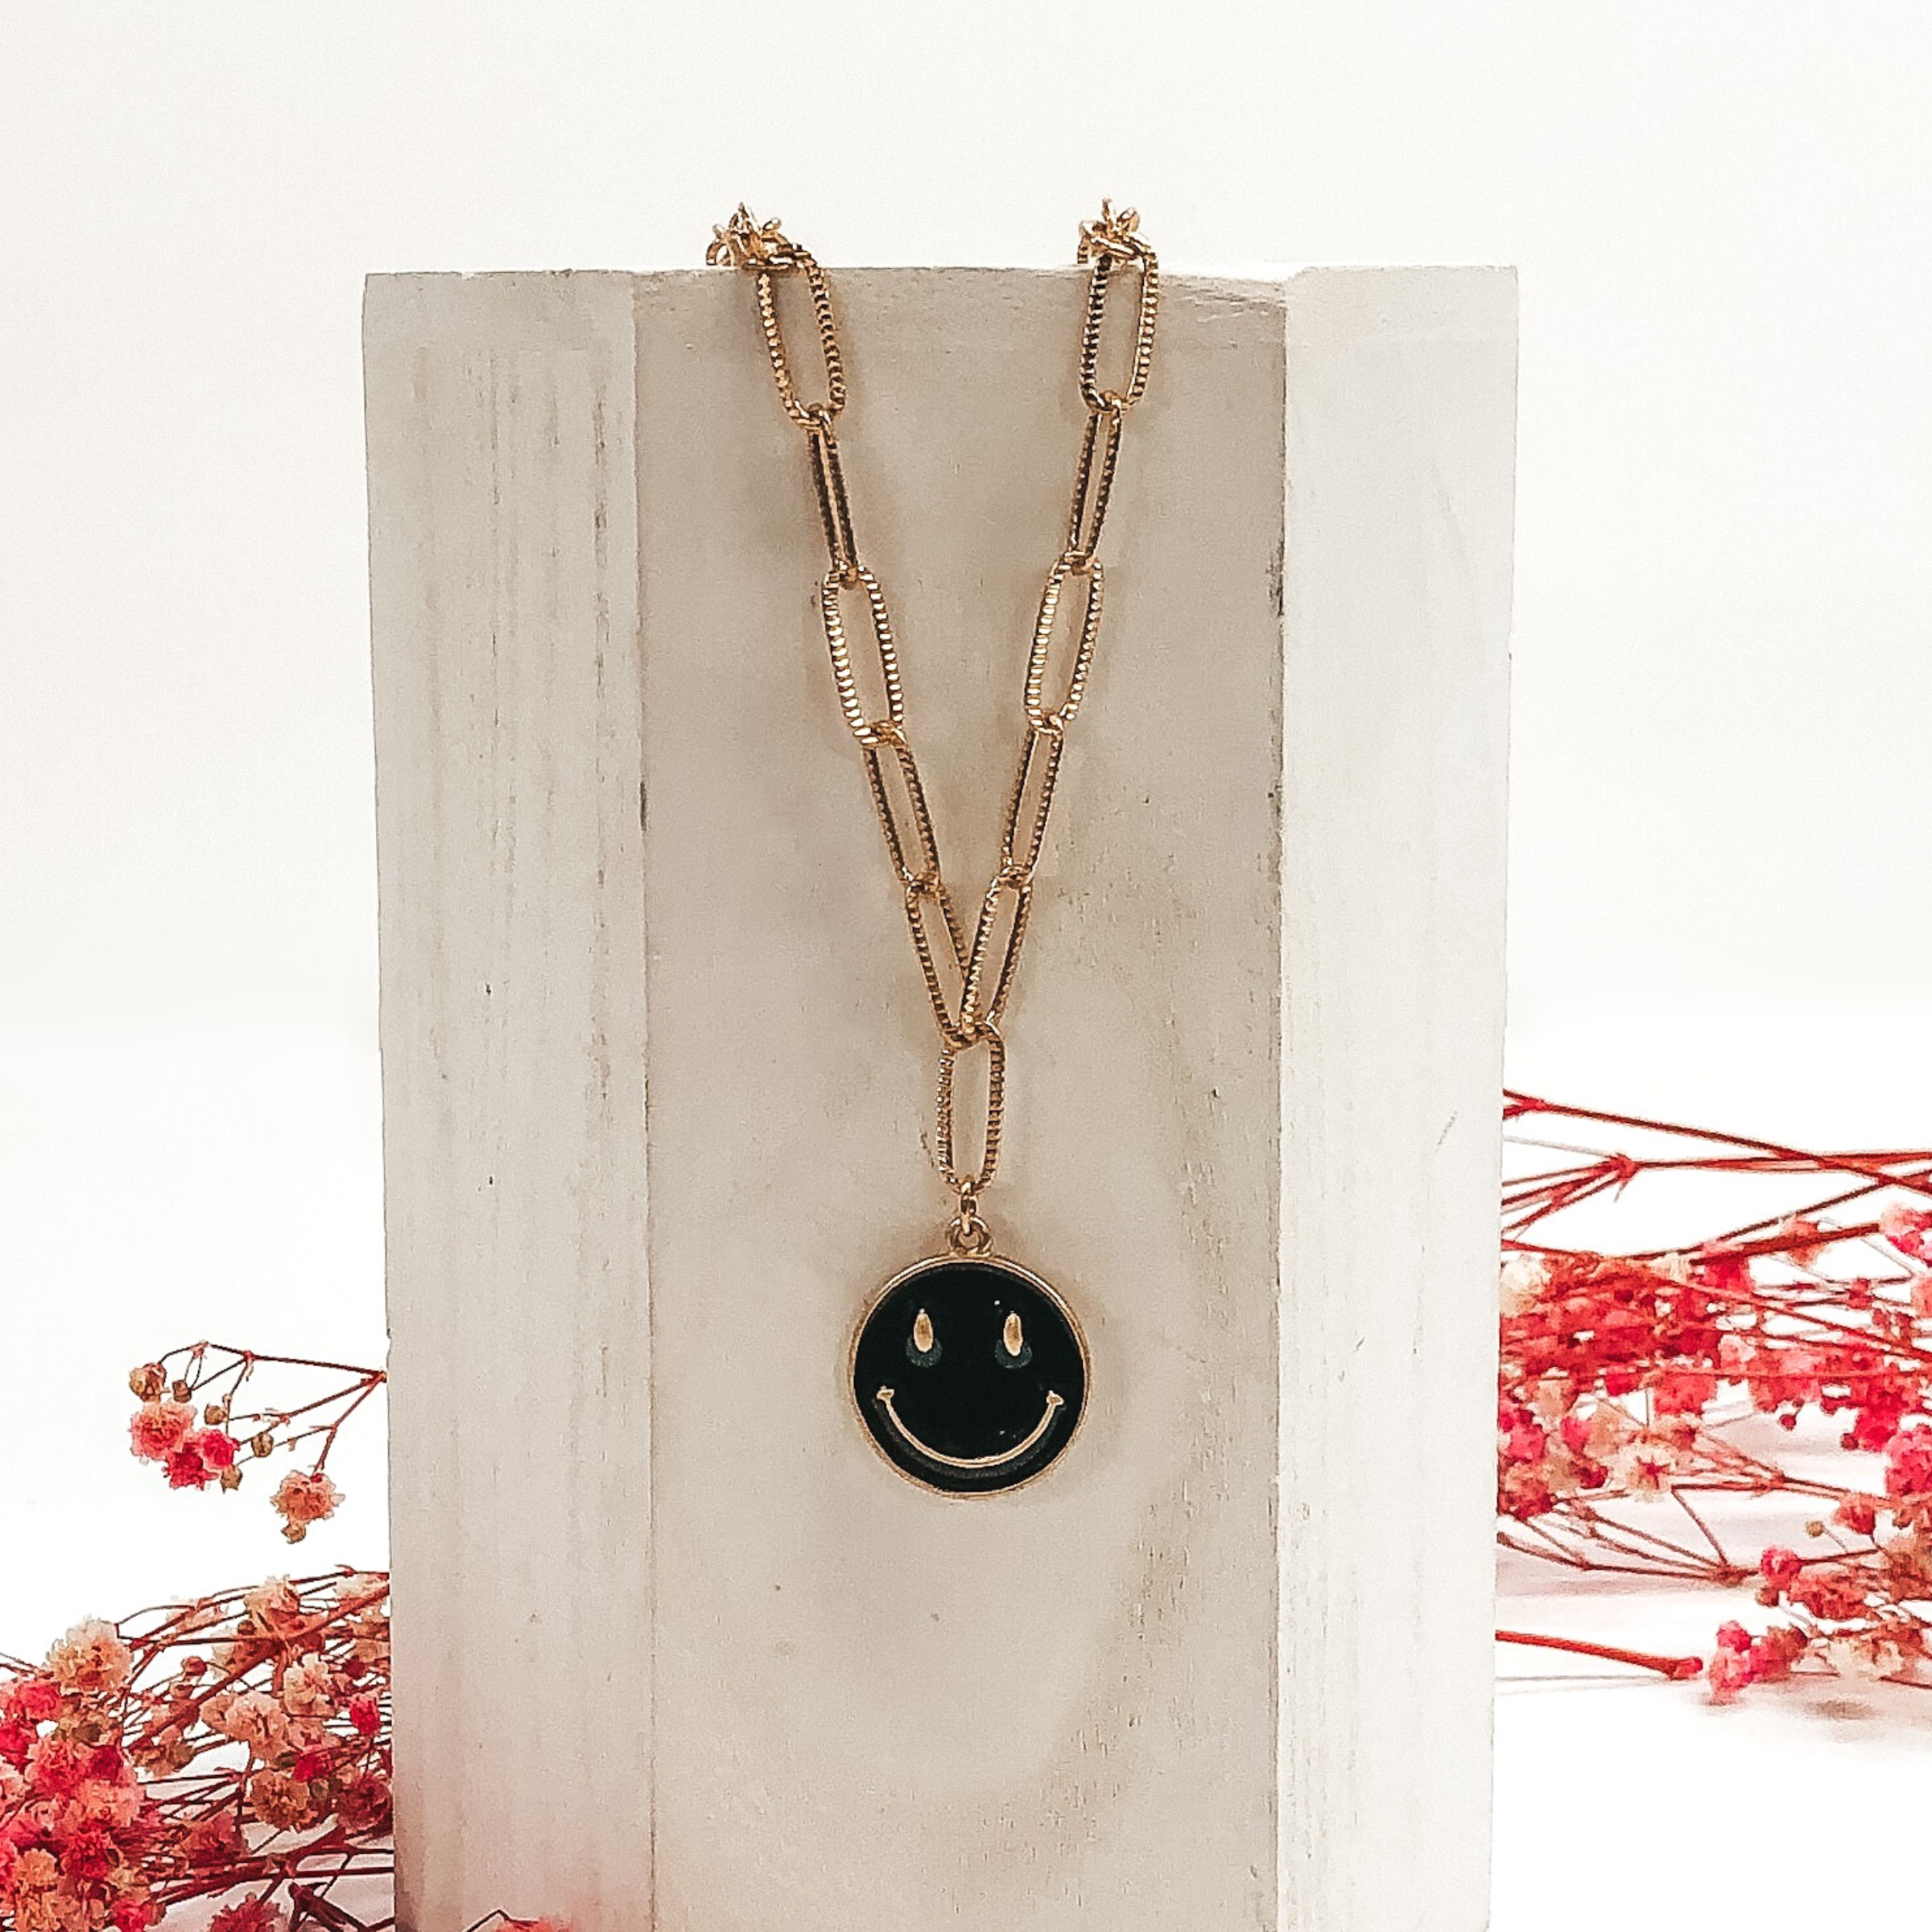 gold necklace with black smiley face